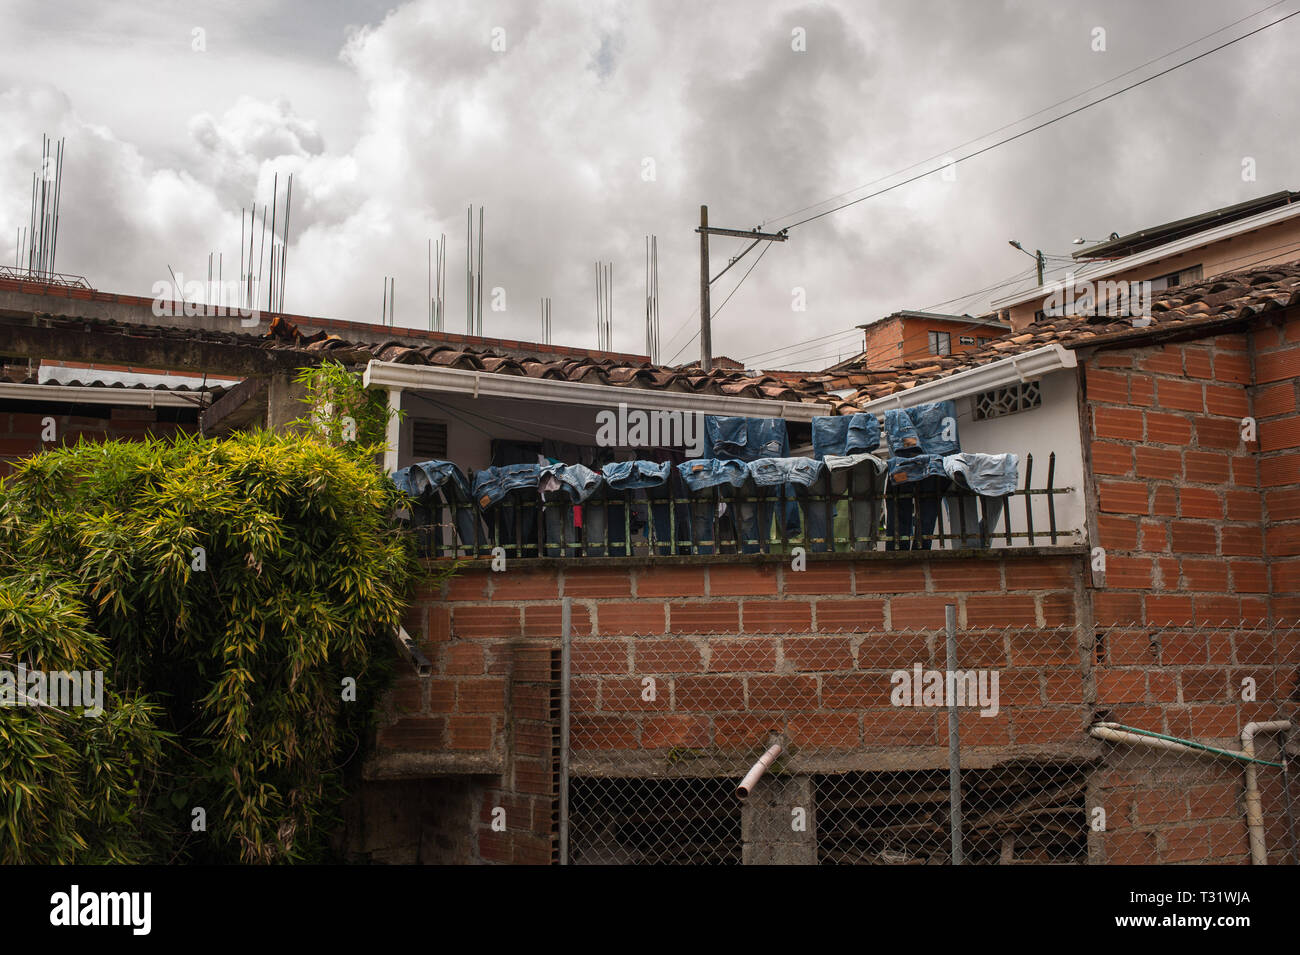 Donmatias, Antioquia, Colombia: A row of blu jeans stretched out to dry on a railing of a house. Stock Photo